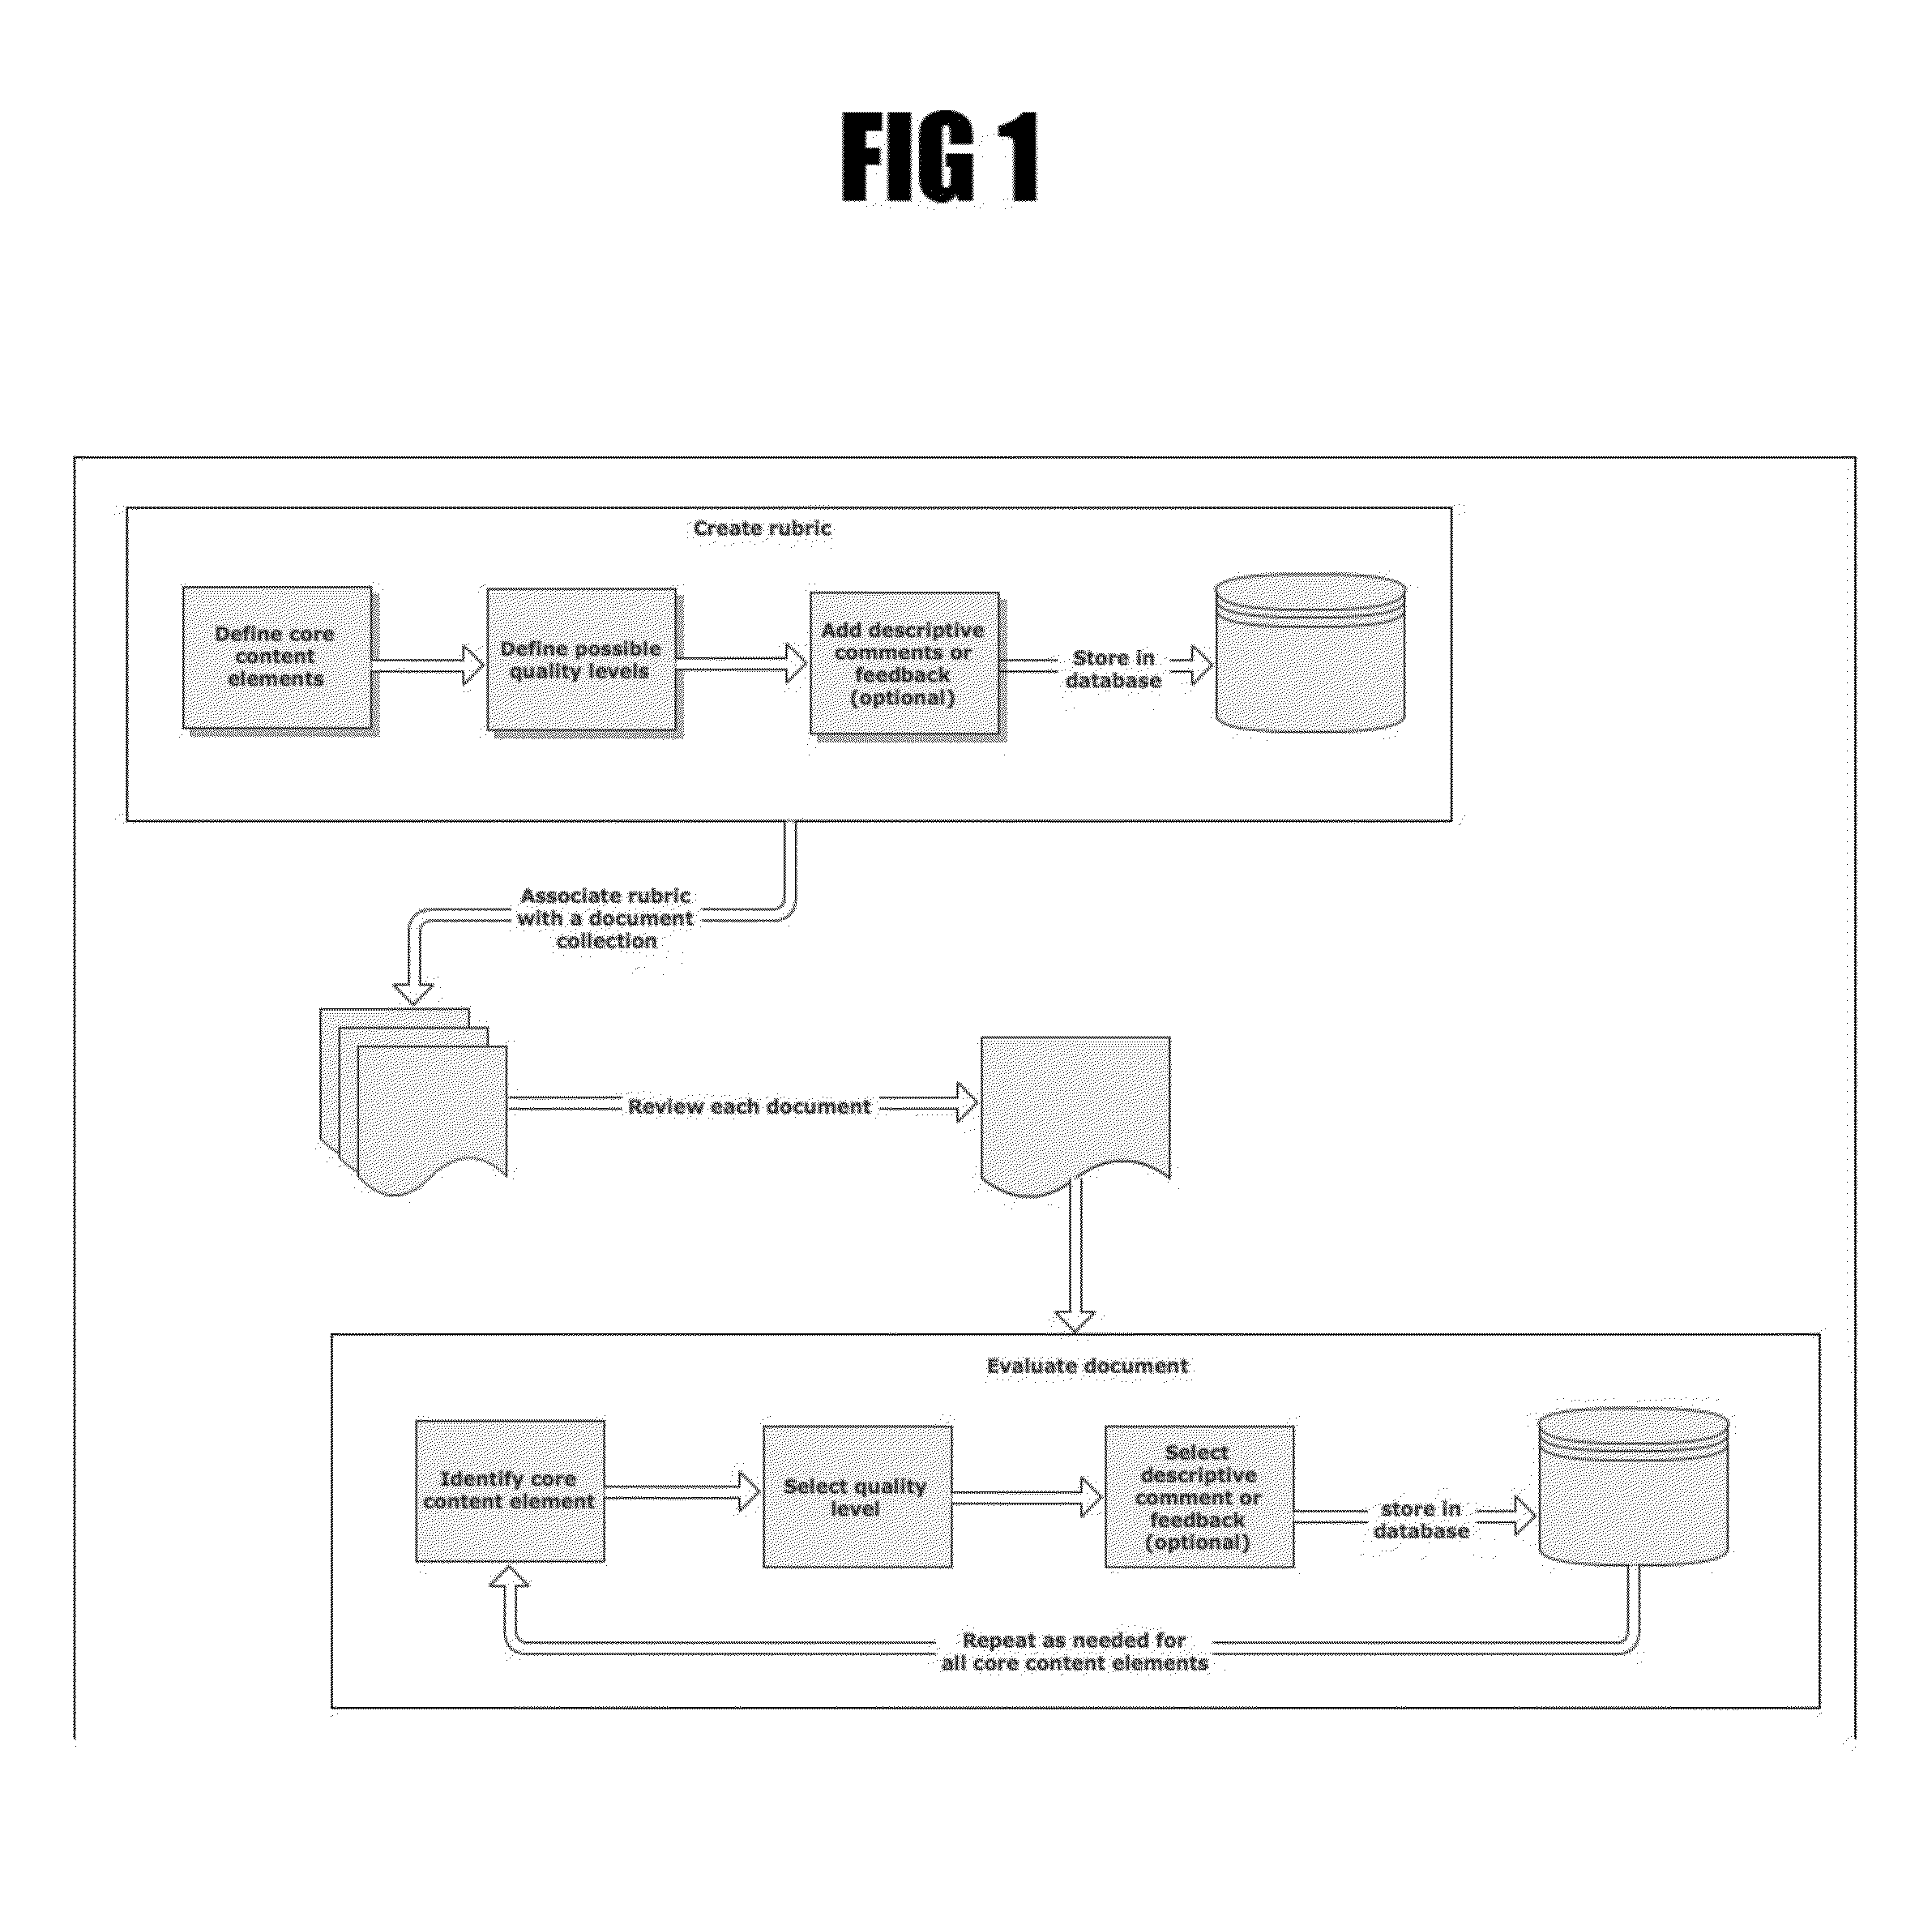 System and methods for structured evaluation, analysis, and retrieval of document contents